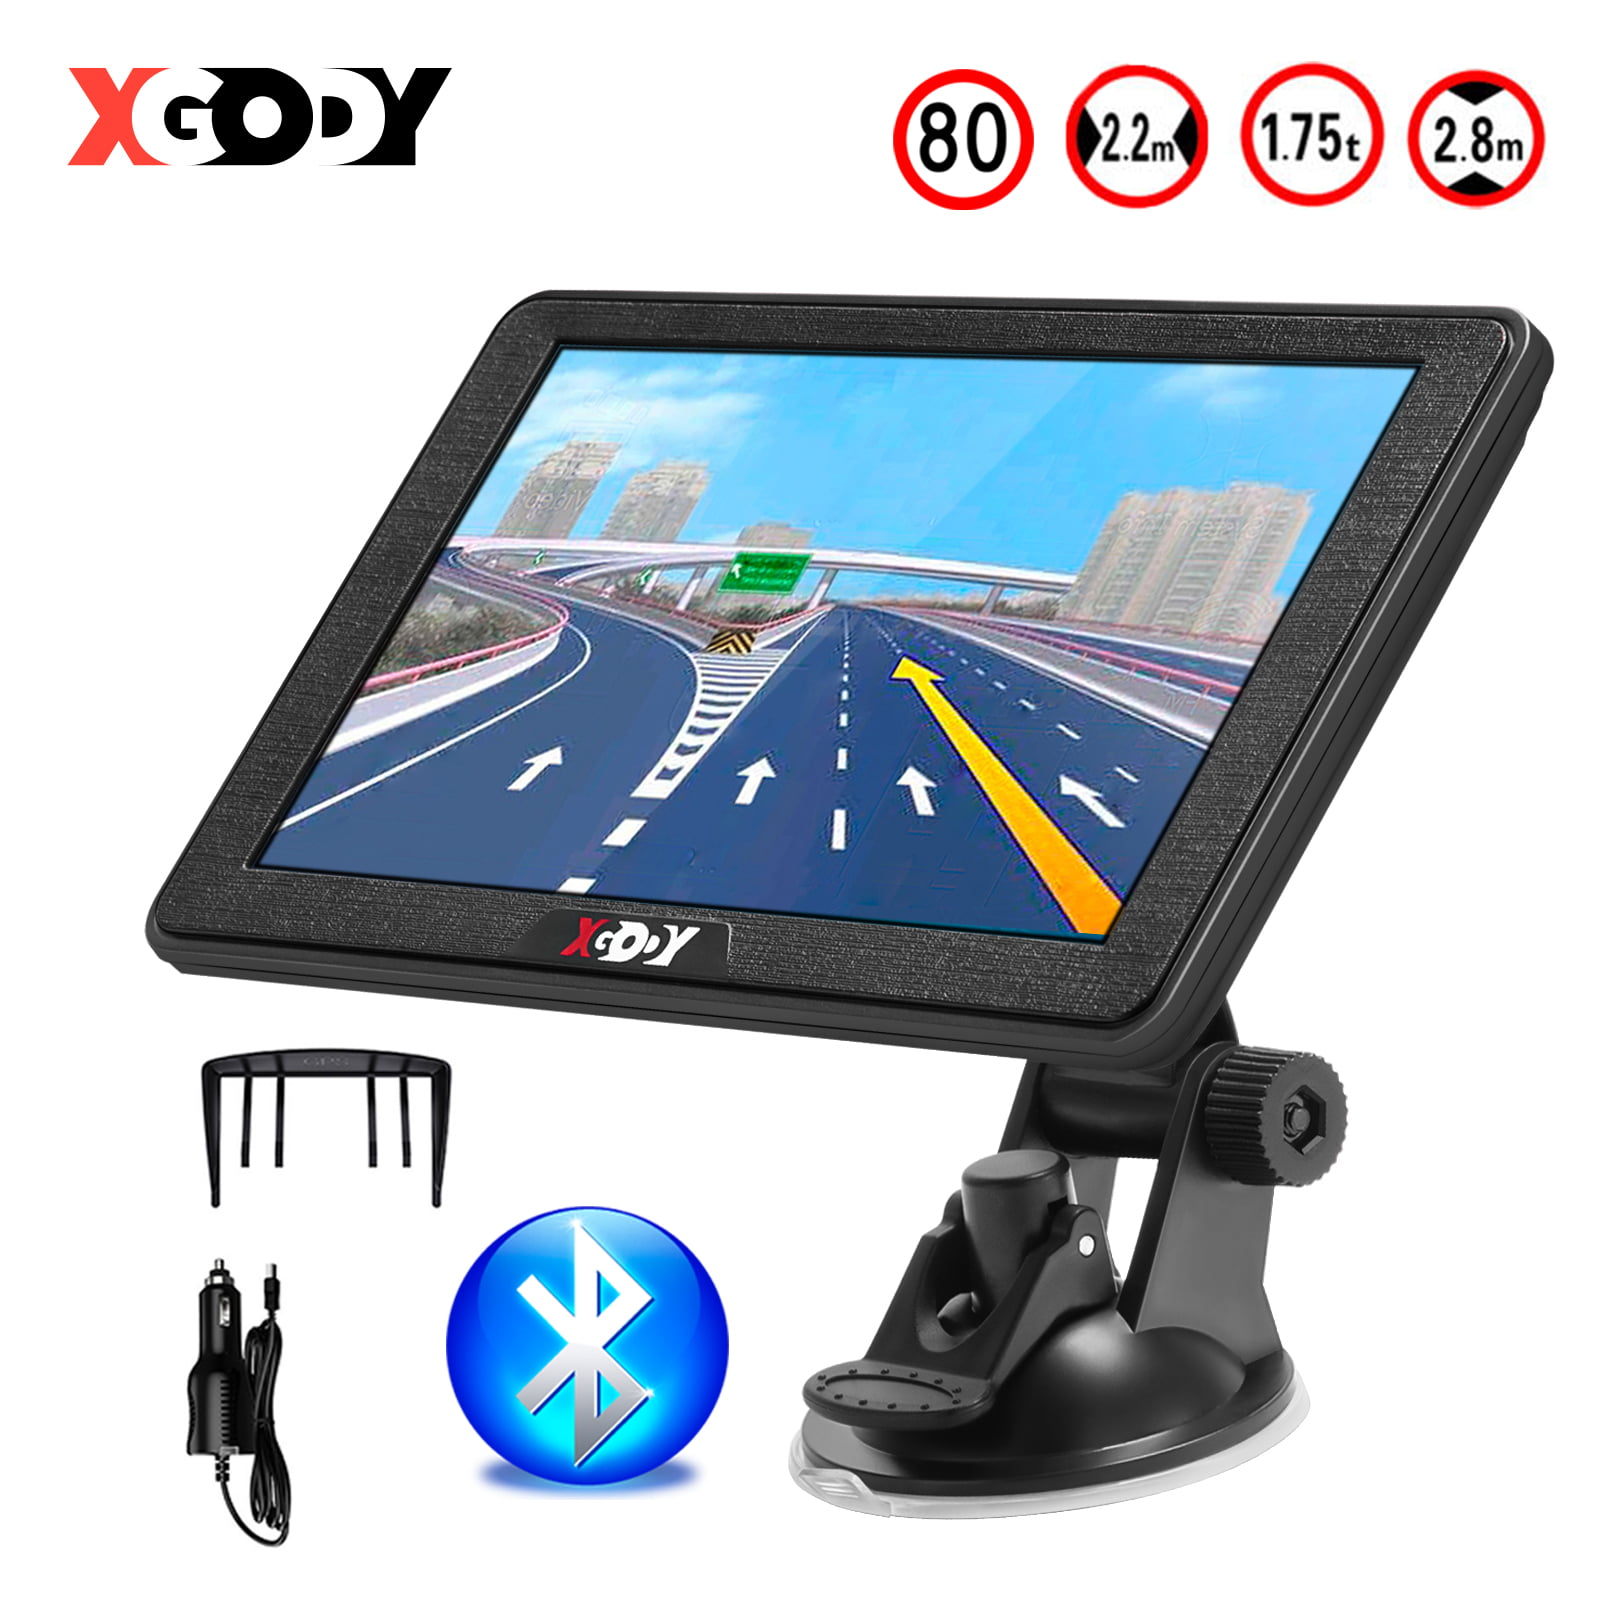 Sat Nav,7 Inch GPS Navigation for Car Truck Motorhome,Smart Voice Reminder,Post Code POI Search & Speed Camera Alerts,2019 UK and EU Newest Map Pre-Installed FREE Lifetime Map Updates 